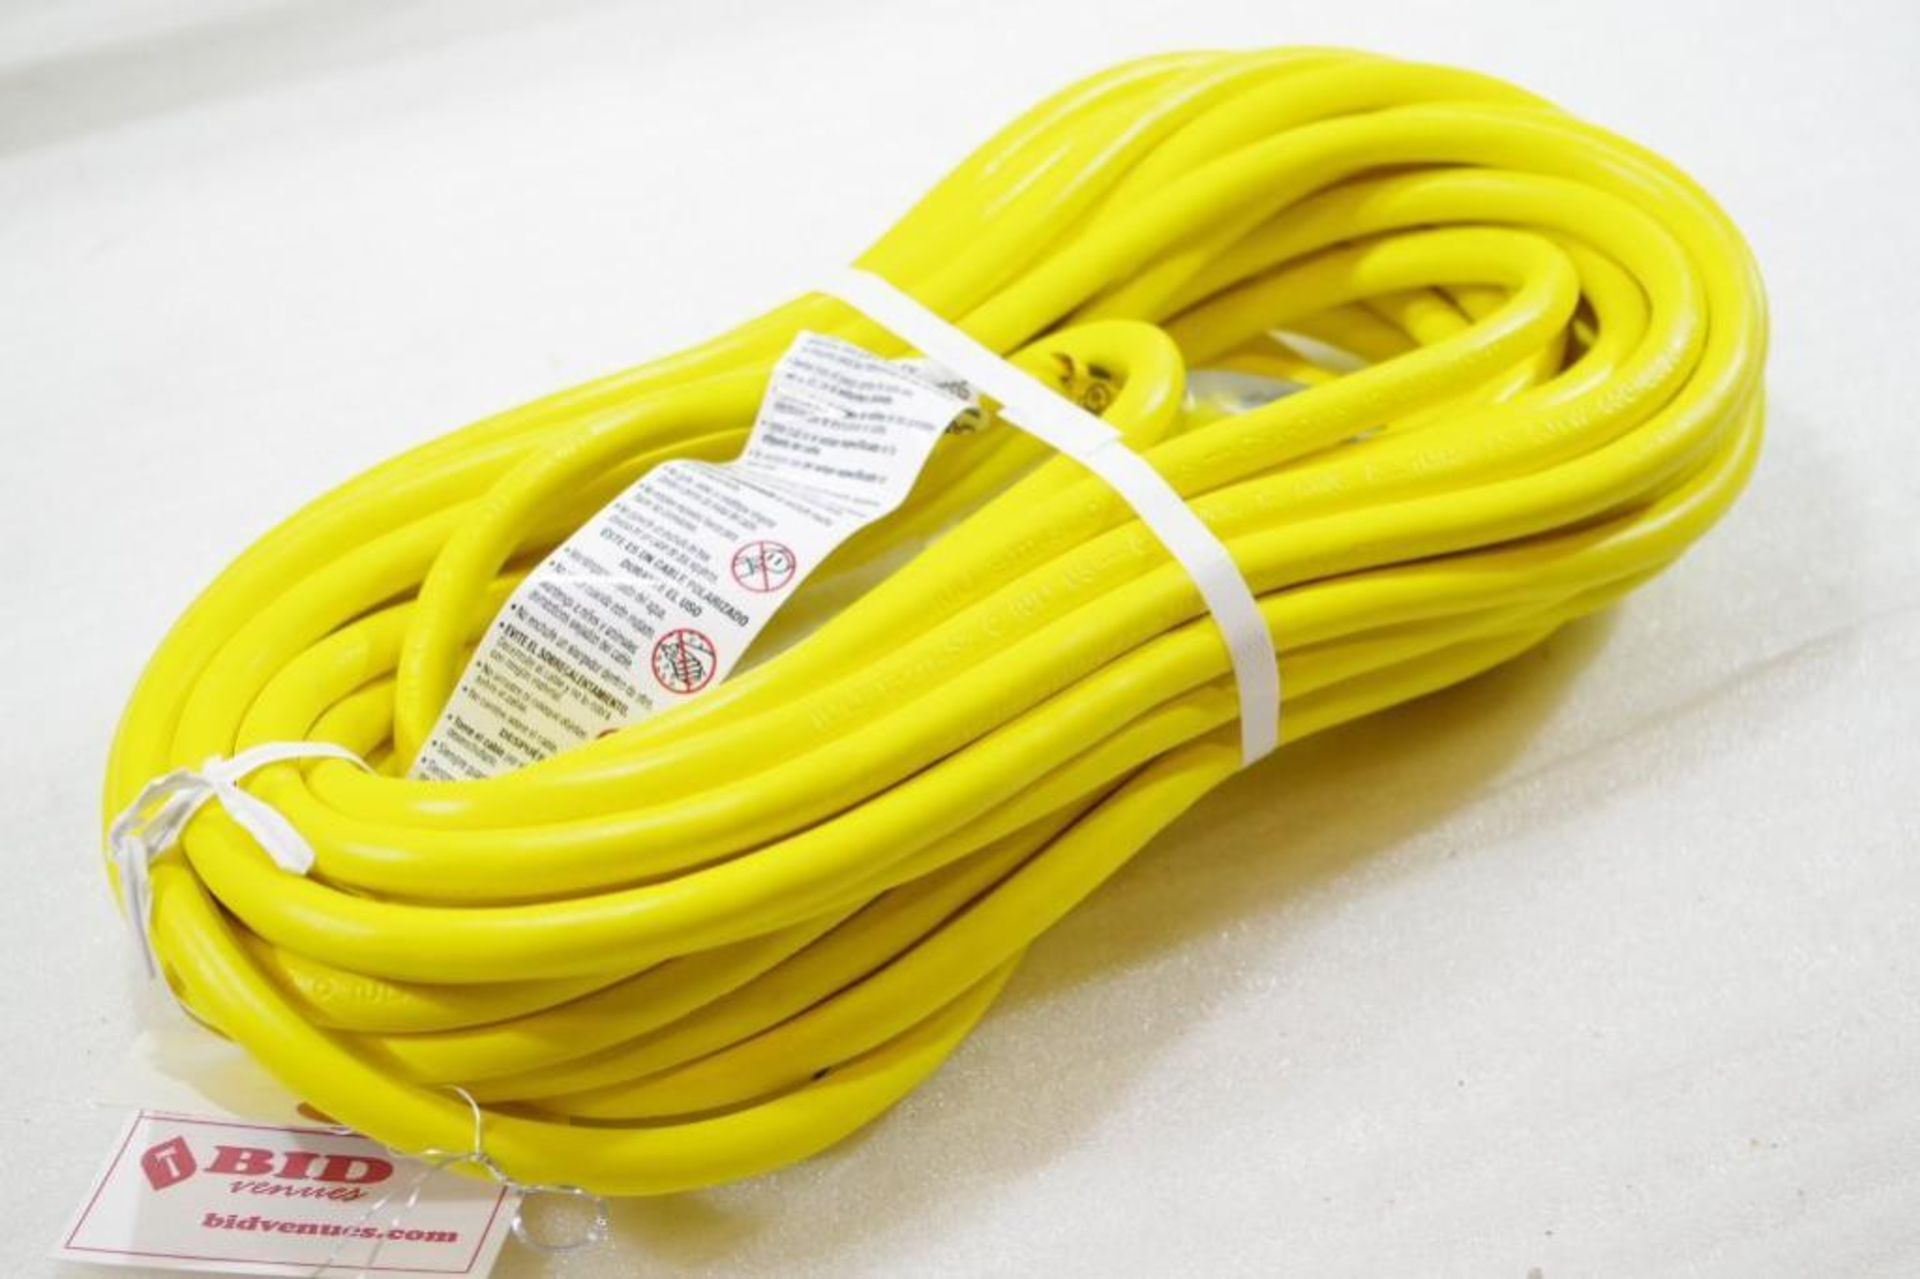 NEW 50 Ft. 12 Gauge Extension Cord w/ Lighted Ends (Yellow), Made in USA - Image 2 of 2